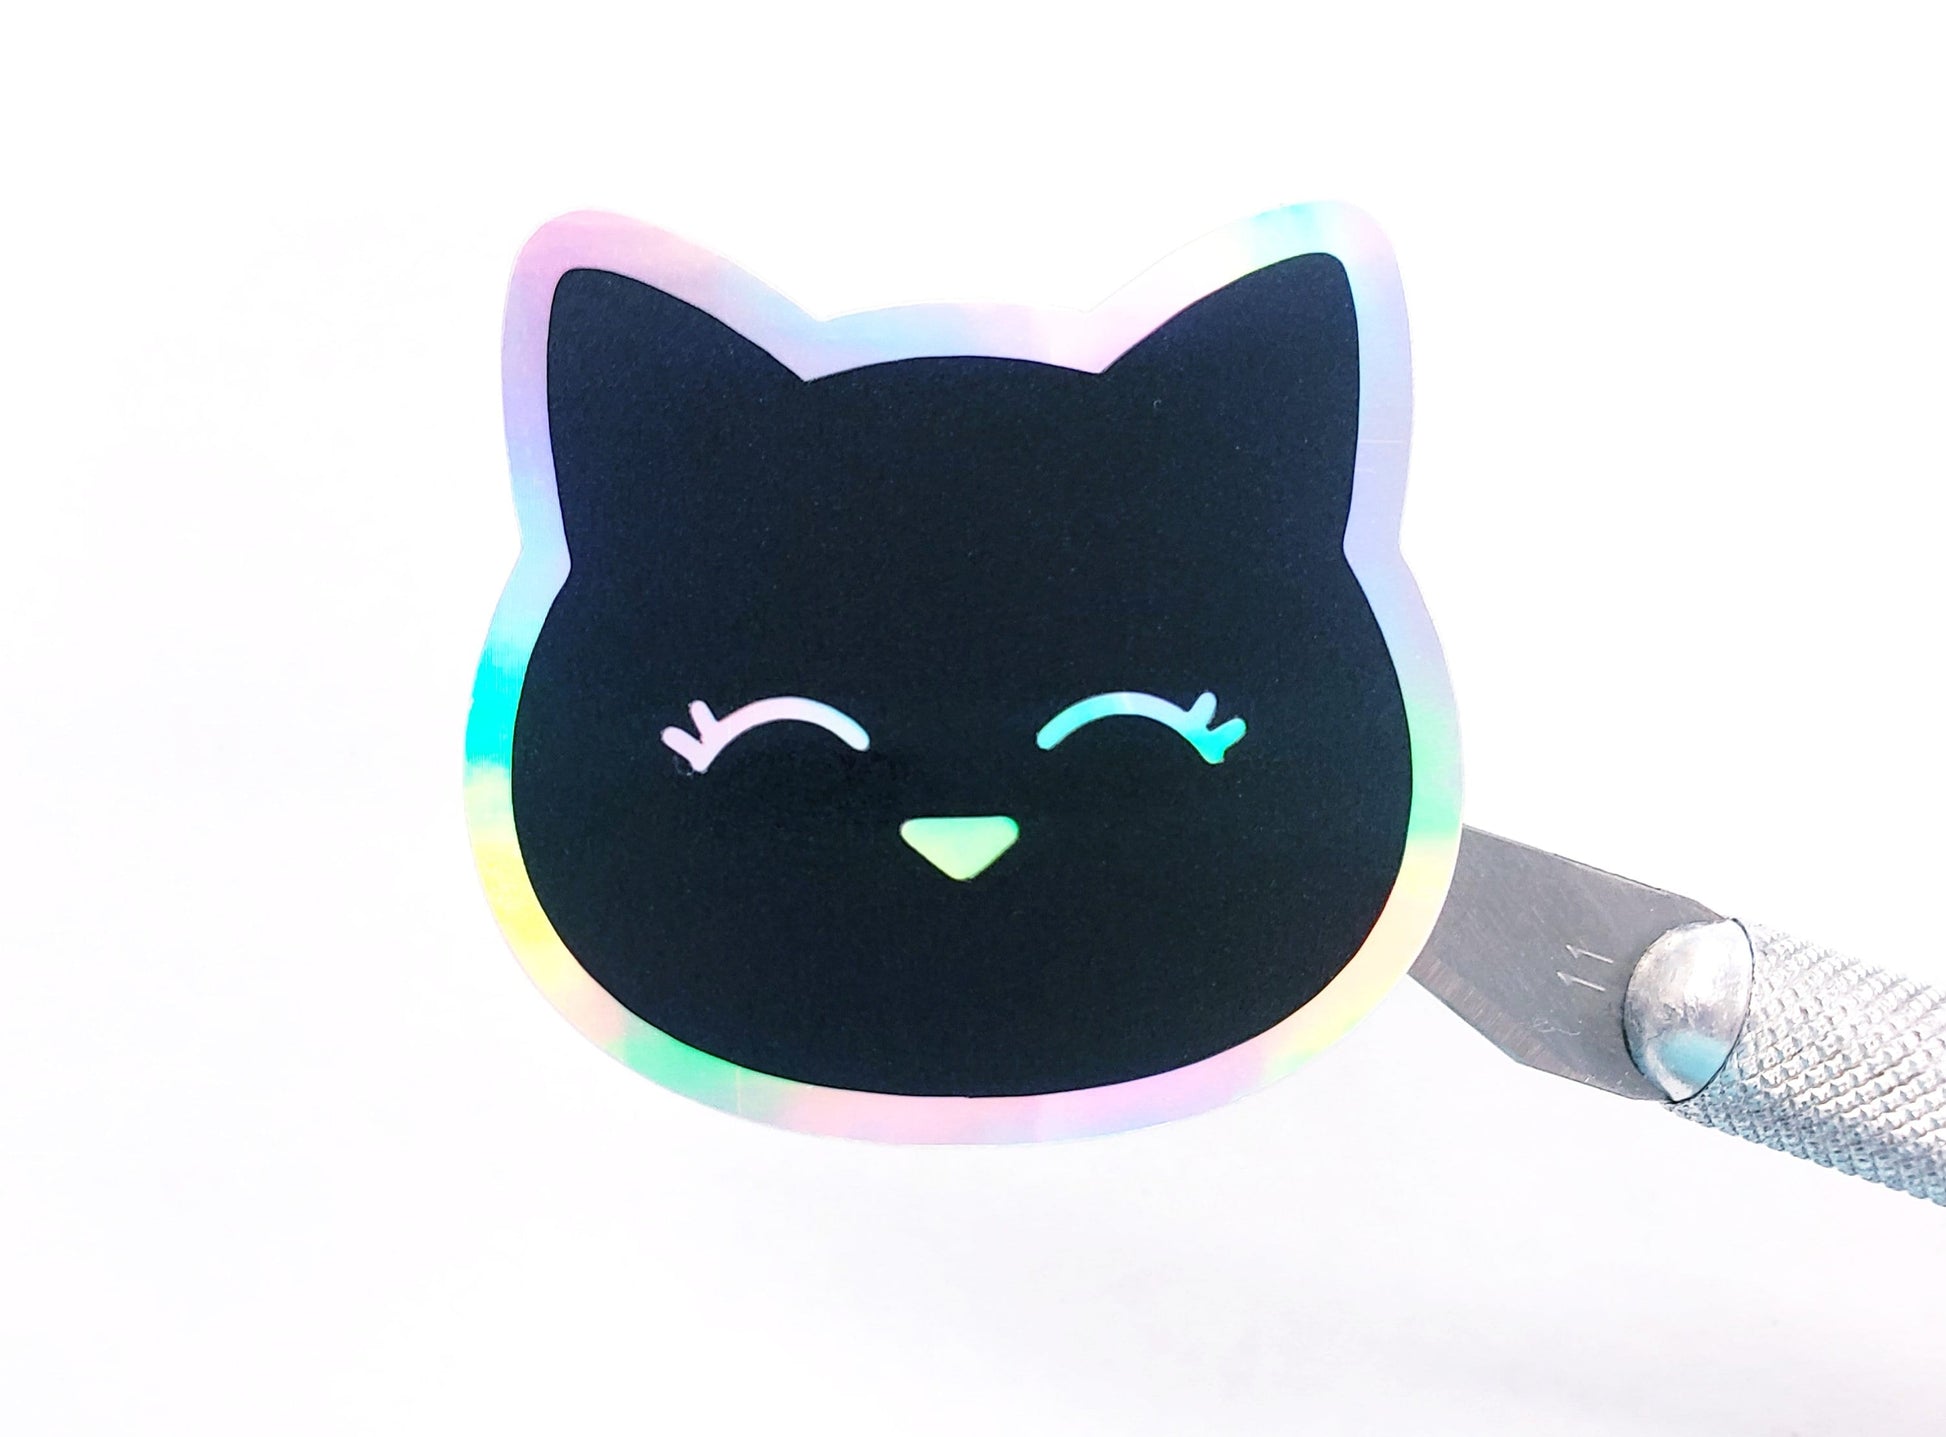 Black Scaredy Cat Holographic Sticker for water bottle, laptop or journal cover.